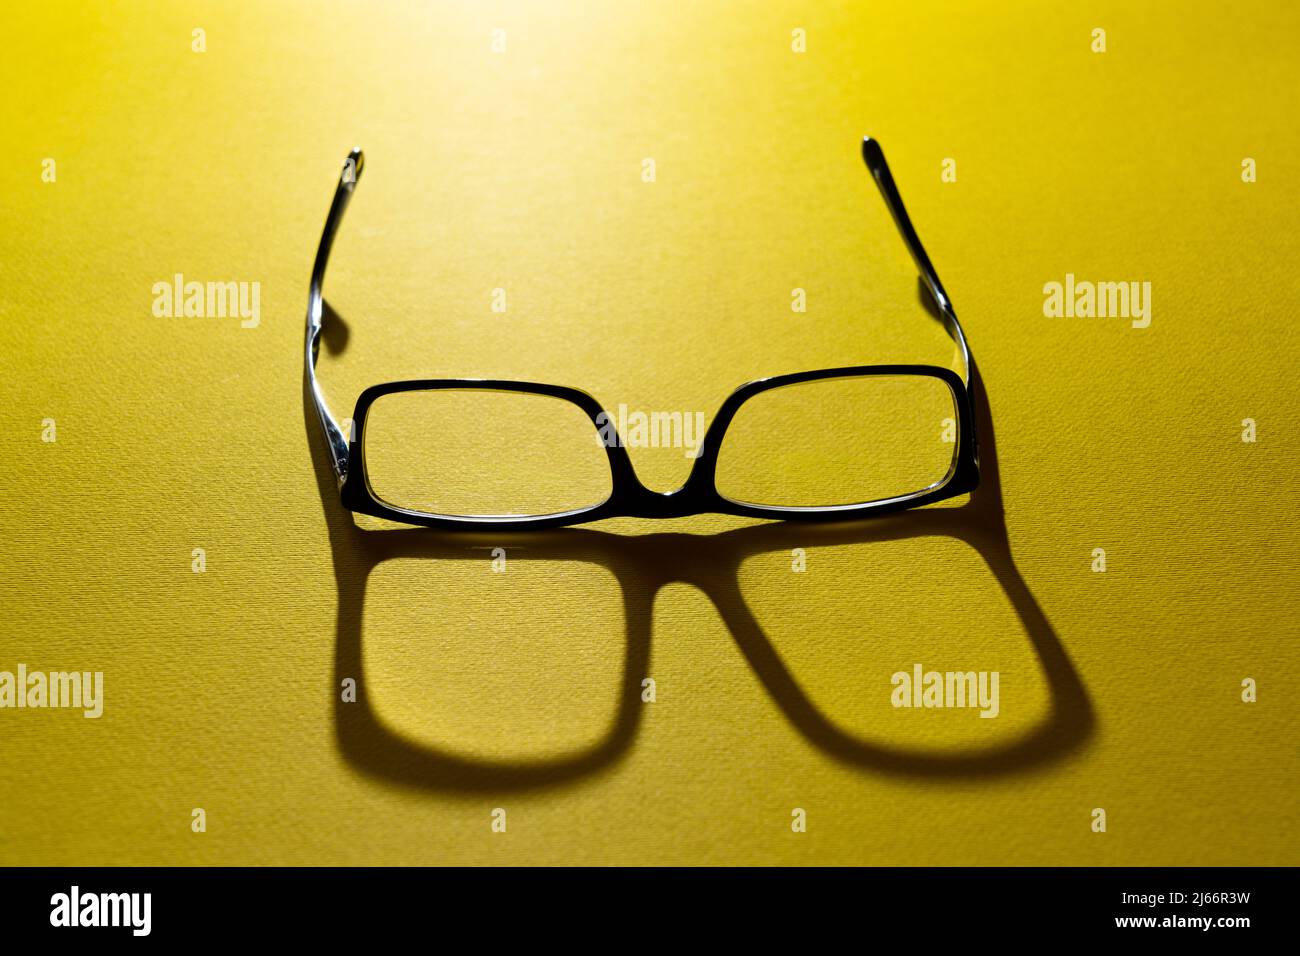 a pair of eyeglasses on a yellow surface Stock Photo